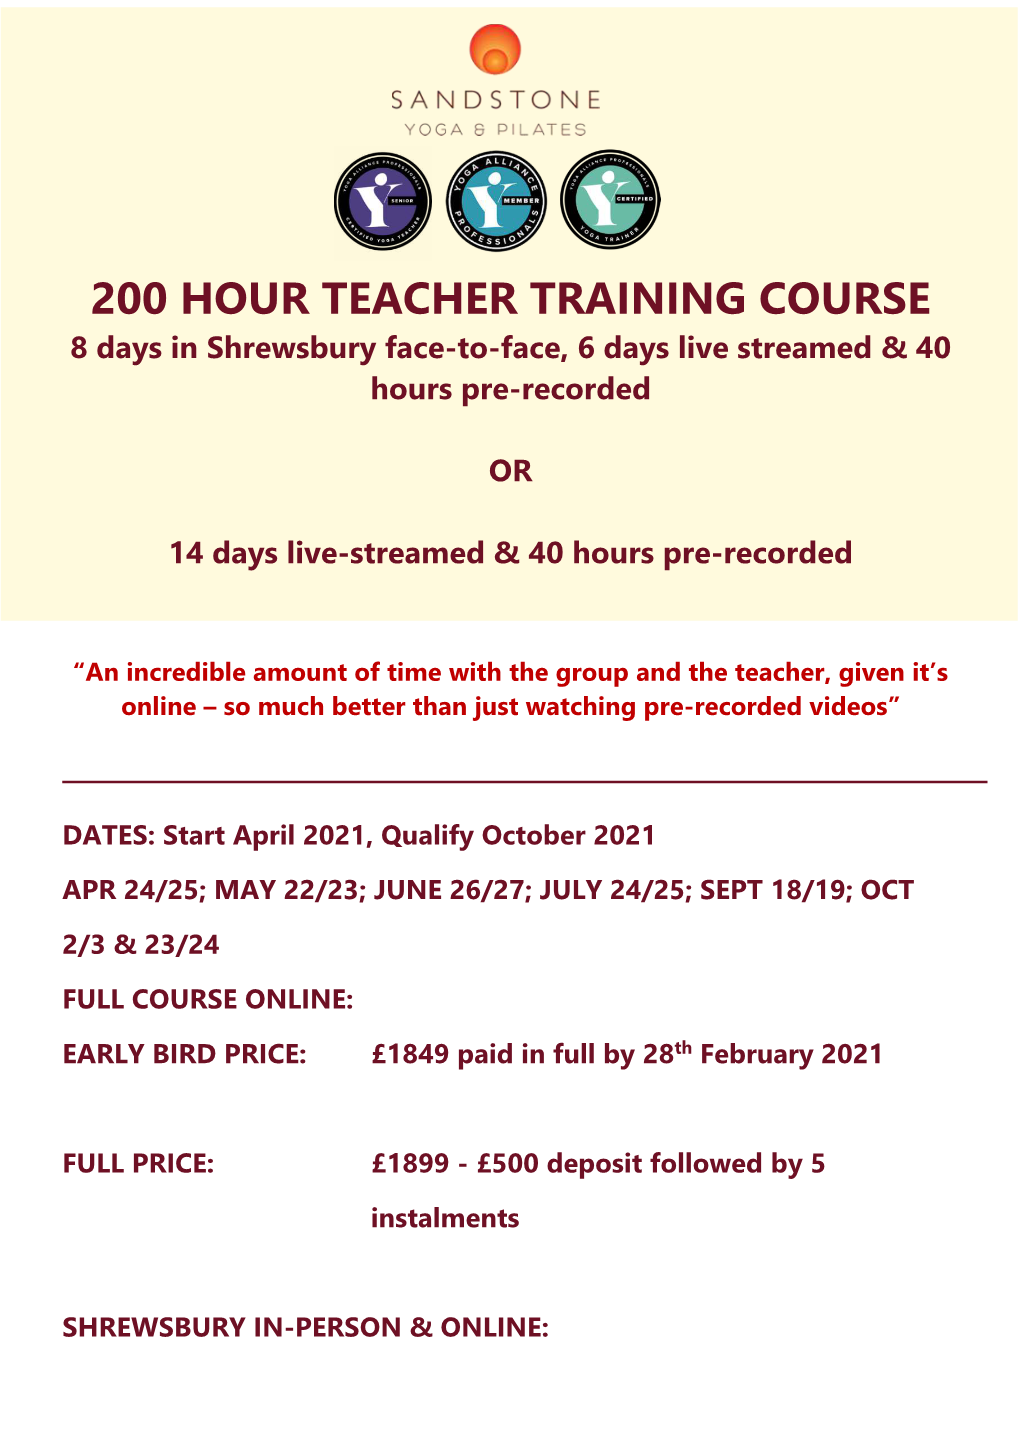 200 HOUR TEACHER TRAINING COURSE 8 Days in Shrewsbury Face-To-Face, 6 Days Live Streamed & 40 Hours Pre-Recorded